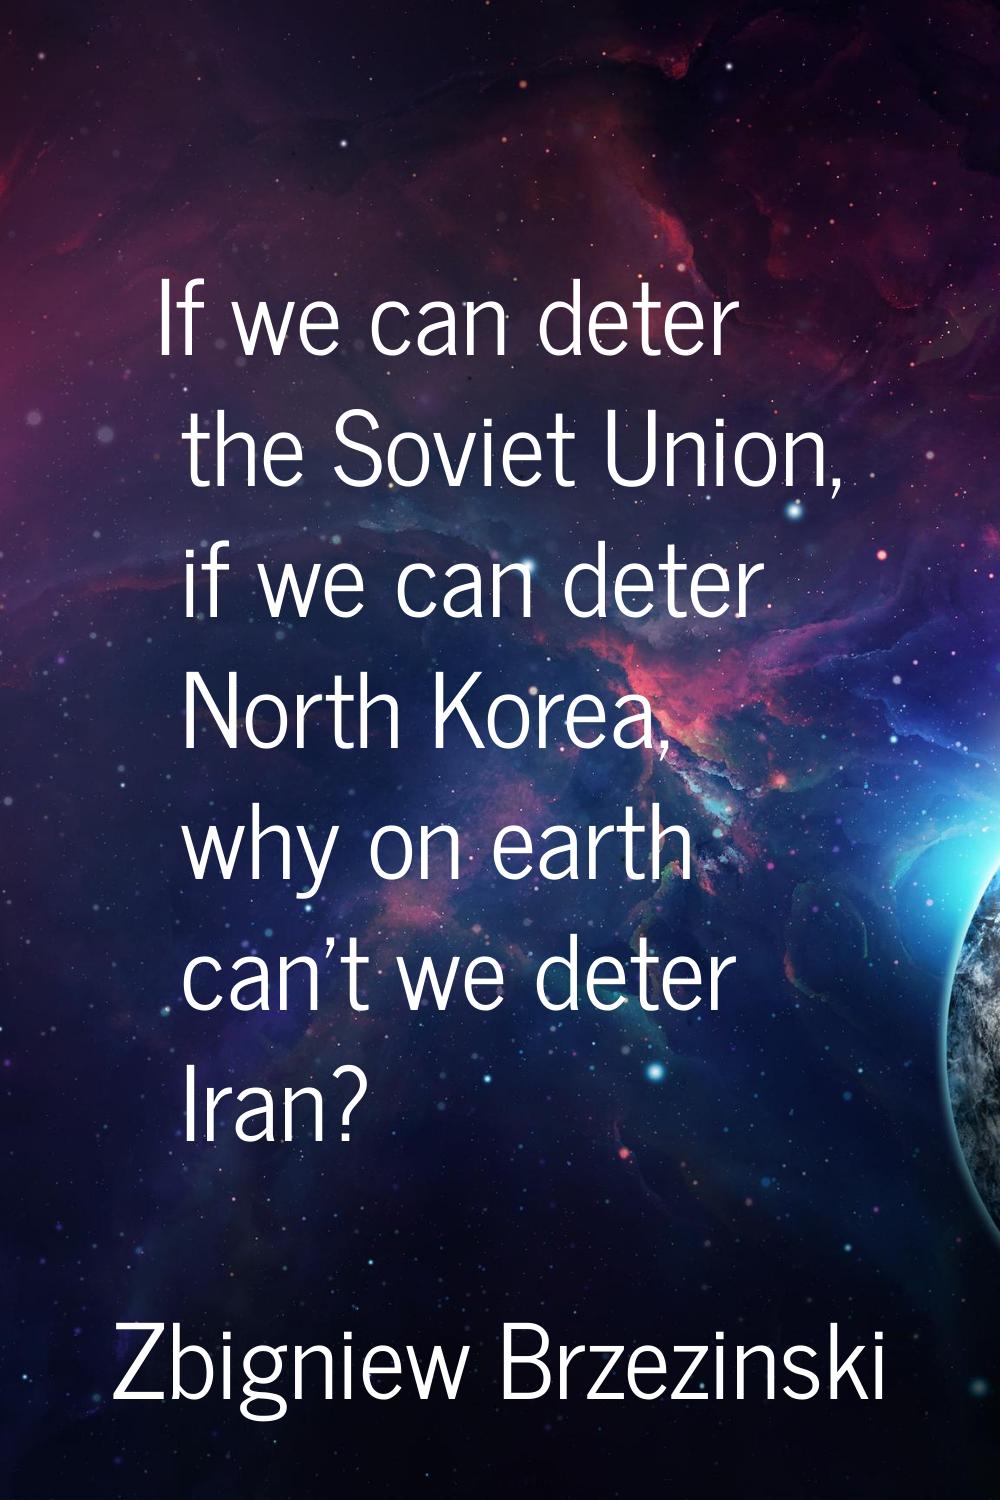 If we can deter the Soviet Union, if we can deter North Korea, why on earth can't we deter Iran?